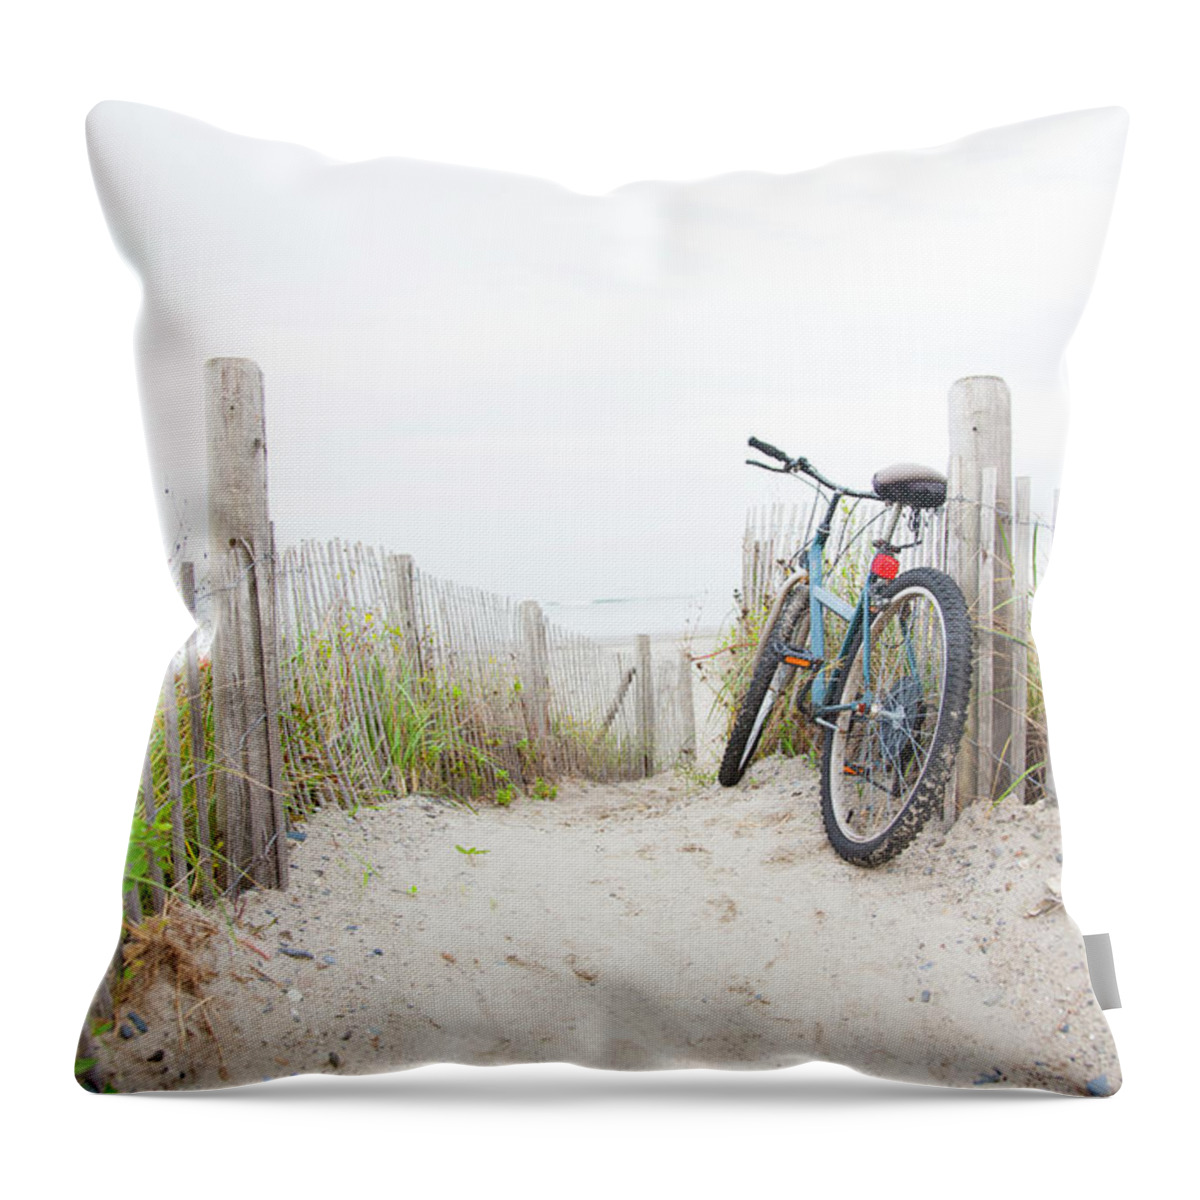 Grass Throw Pillow featuring the photograph Bicycle Leaning On Beach Fence by Jacqueline Veissid